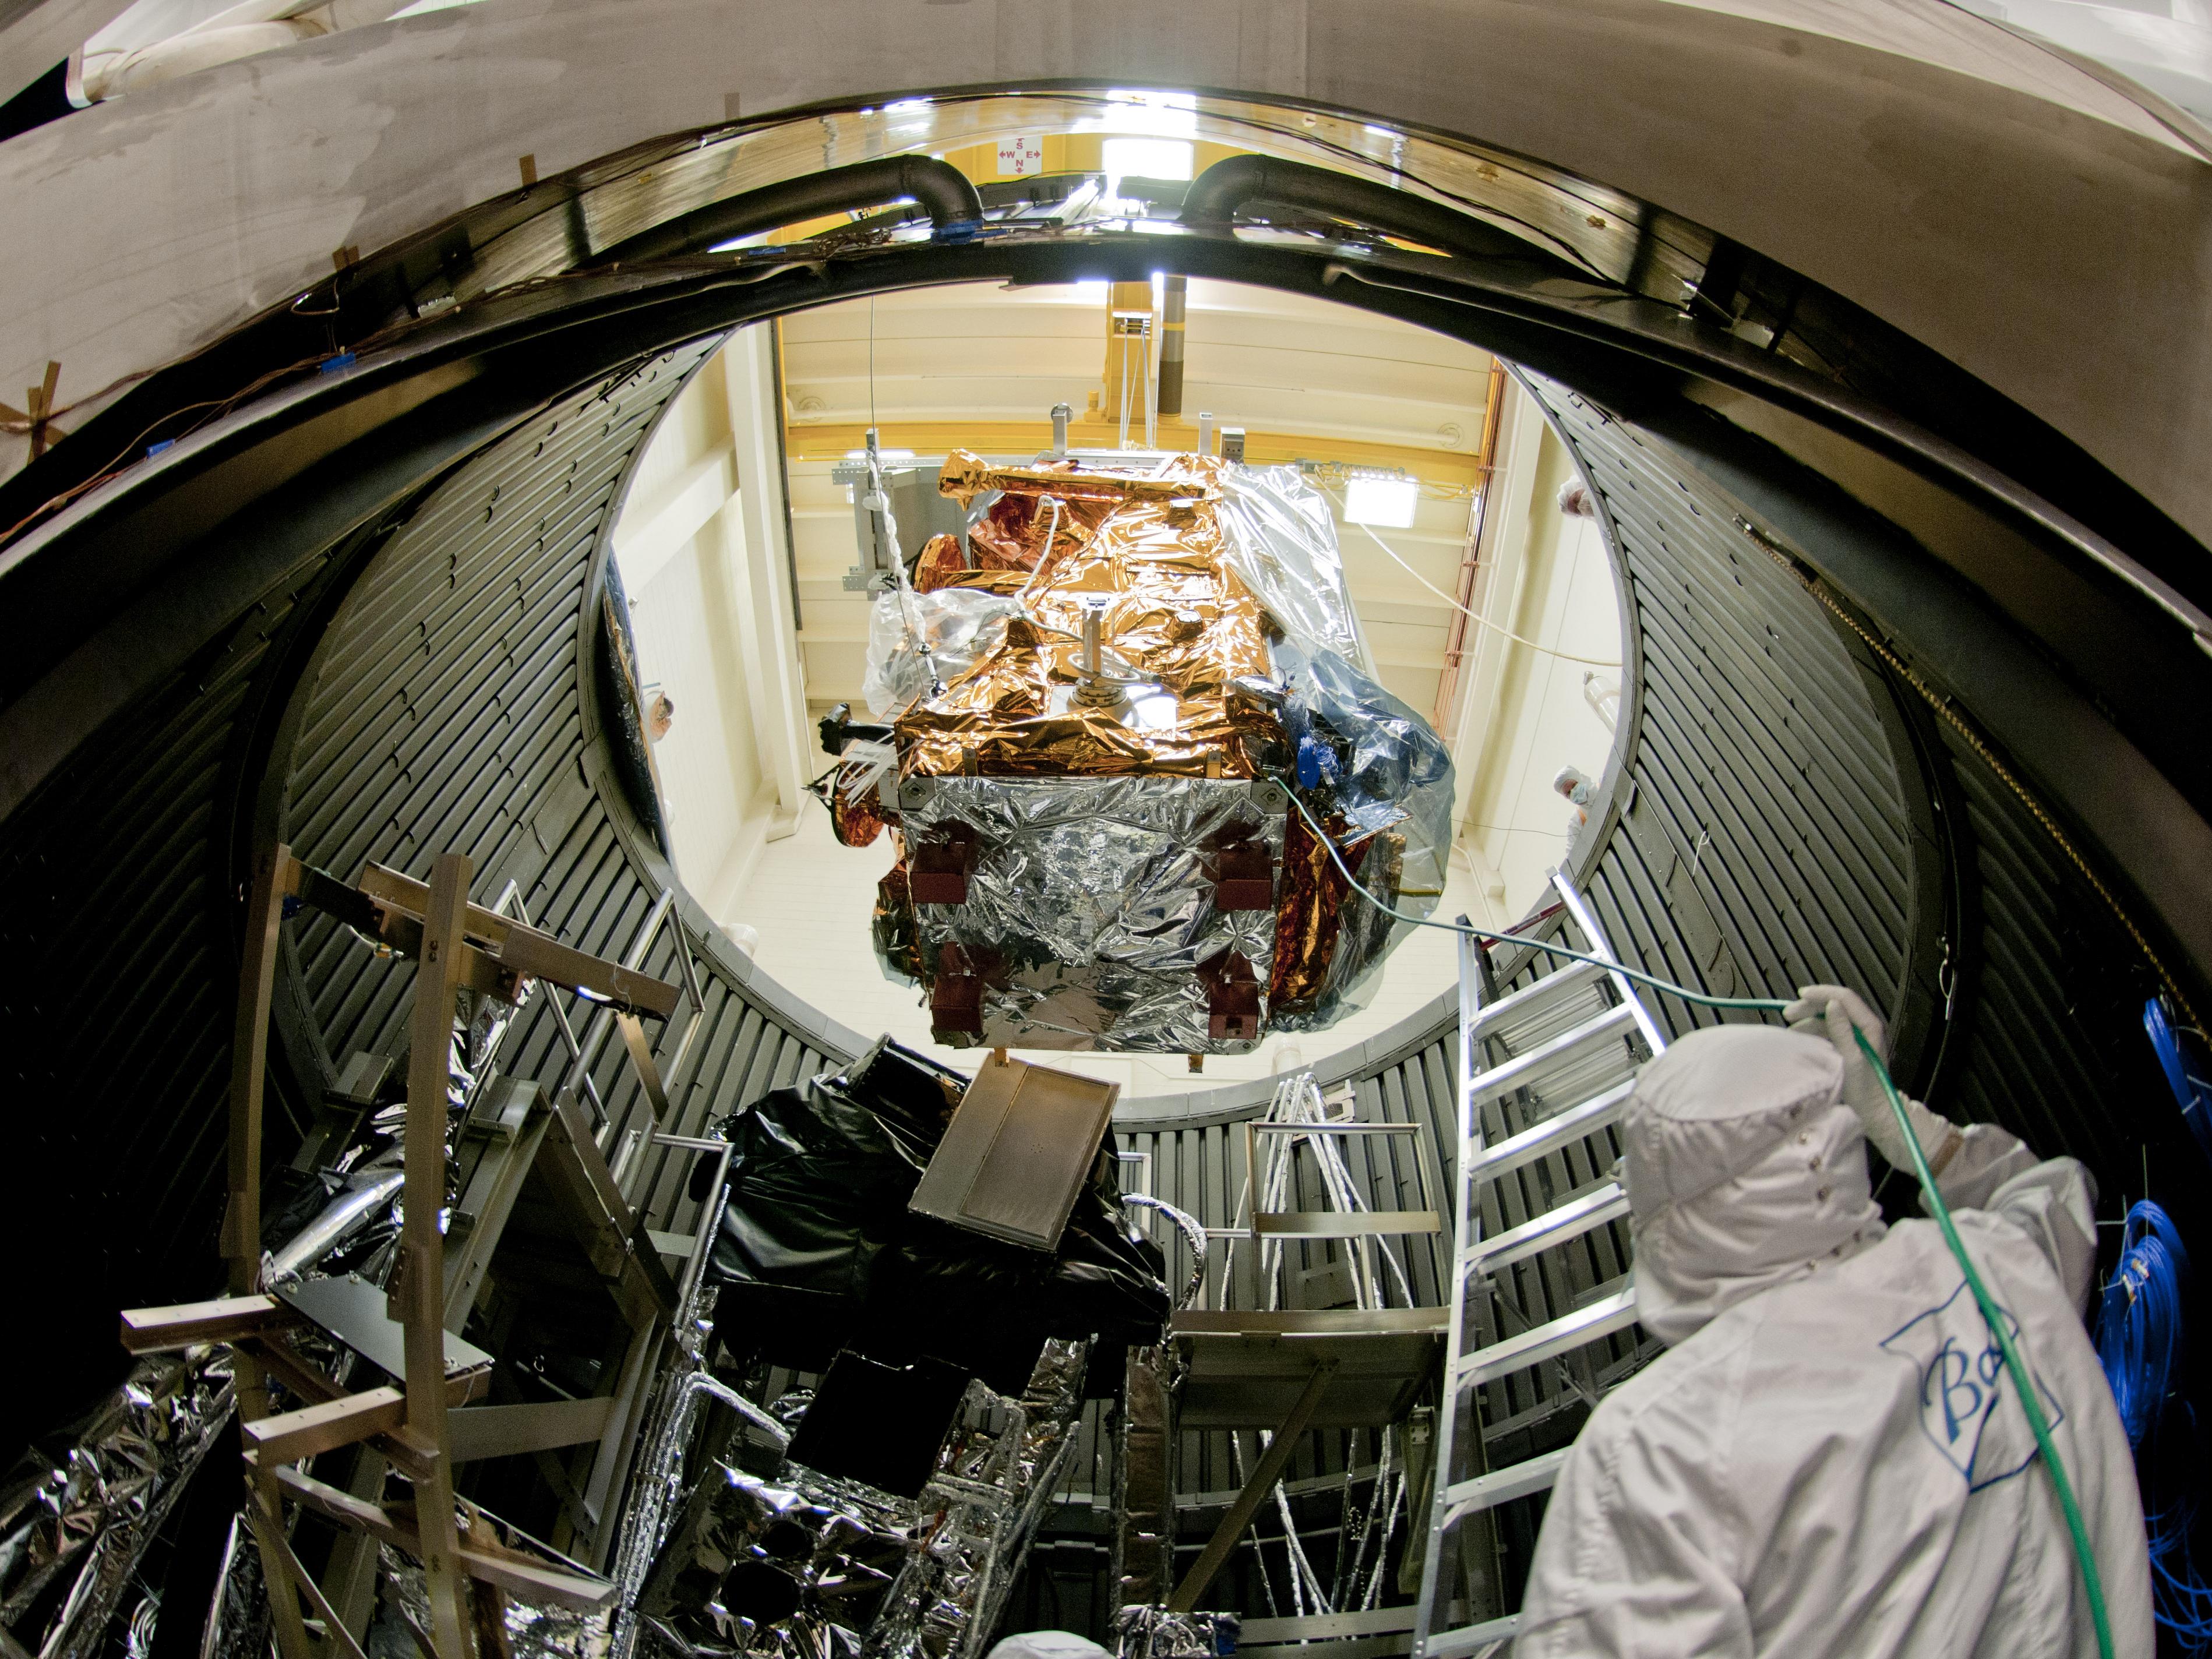 A group of engineers testing a satellite in a large chamber